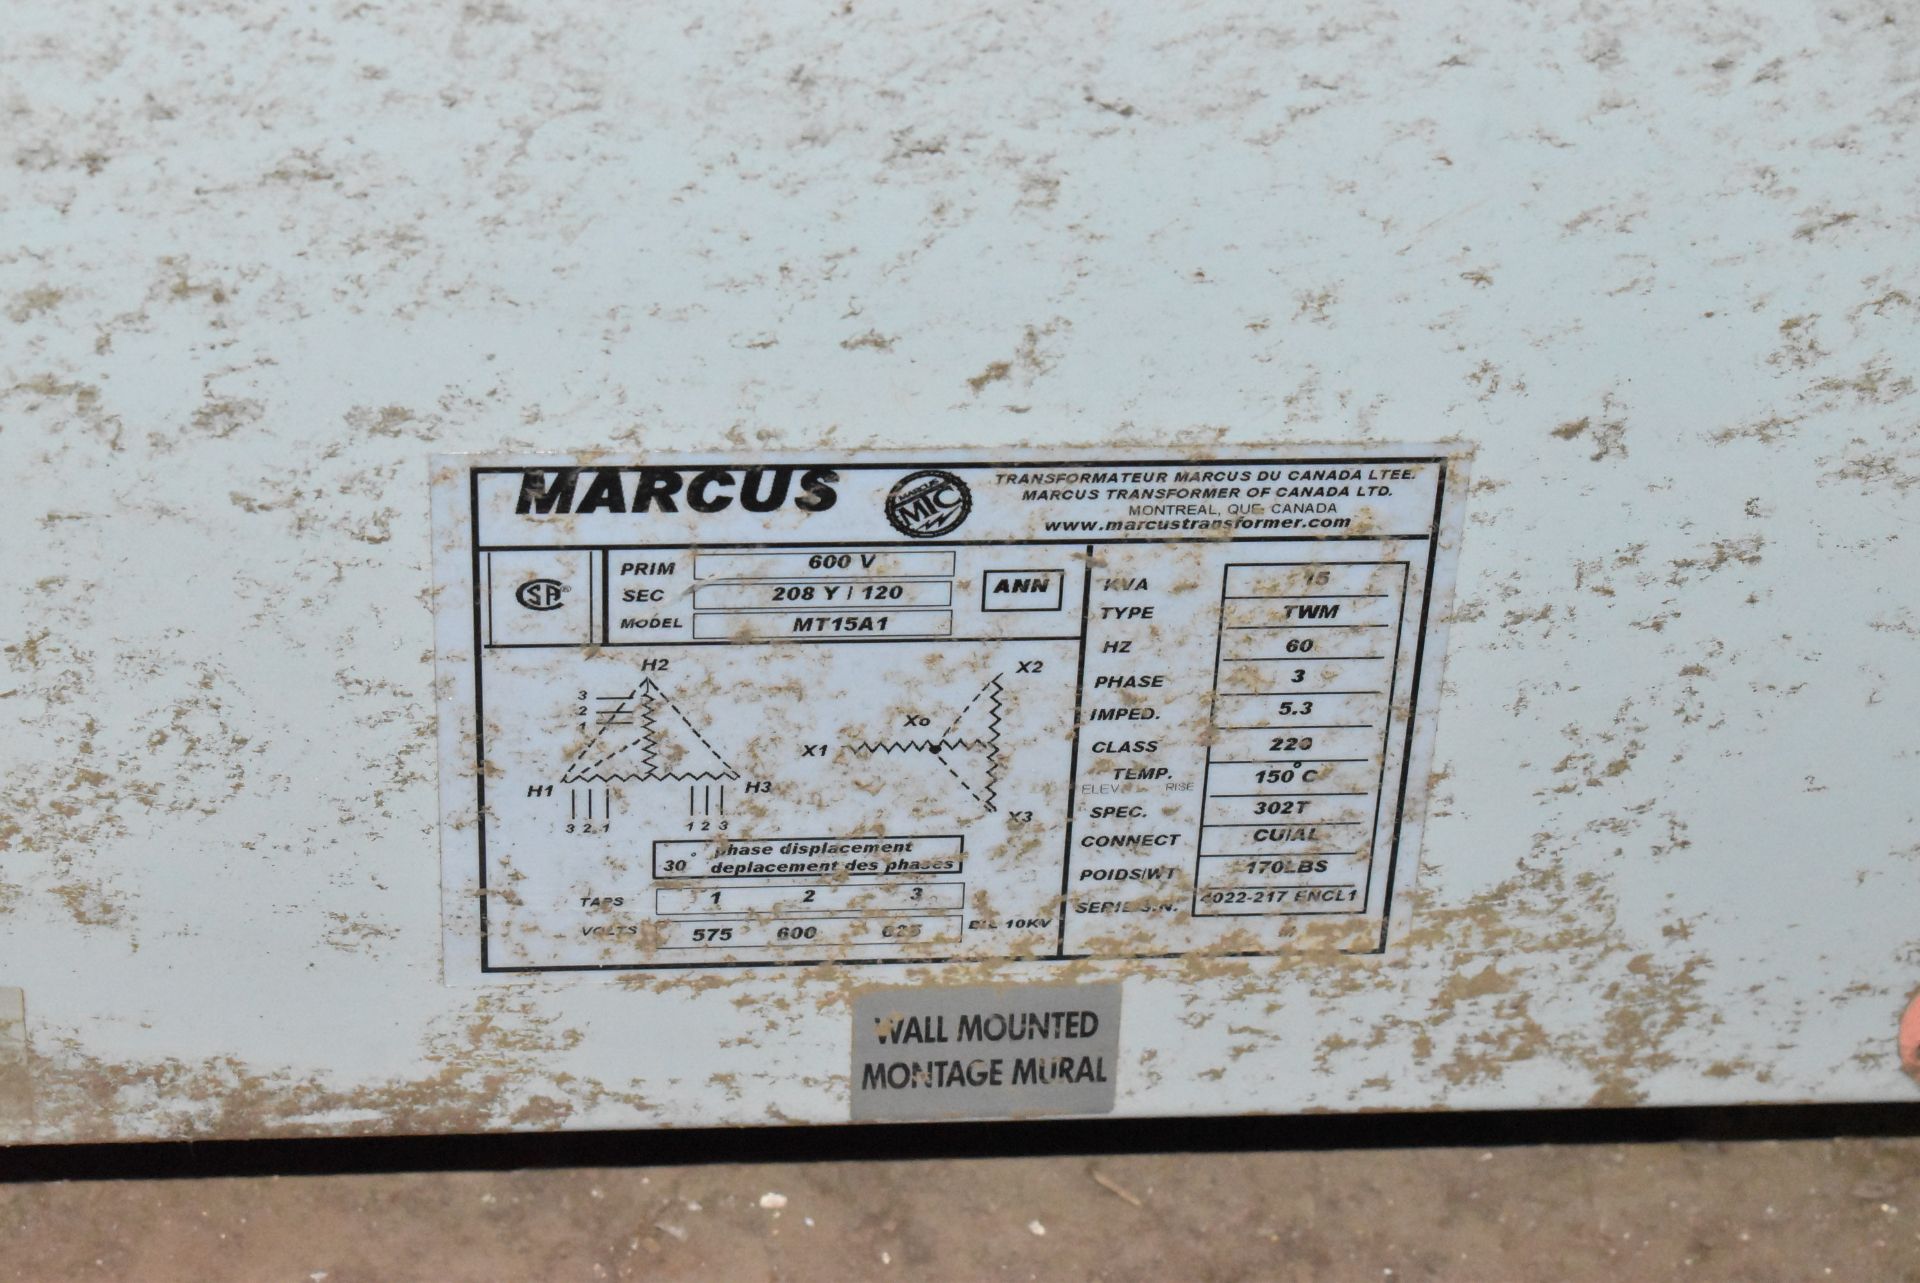 MARCUS 15 KVA TRANSFORMER WITH 600V PRIMARY, 208Y/120V SECONDARY, 3PH, 60 HZ (CI) (DELAYED DELIVERY) - Image 4 of 4